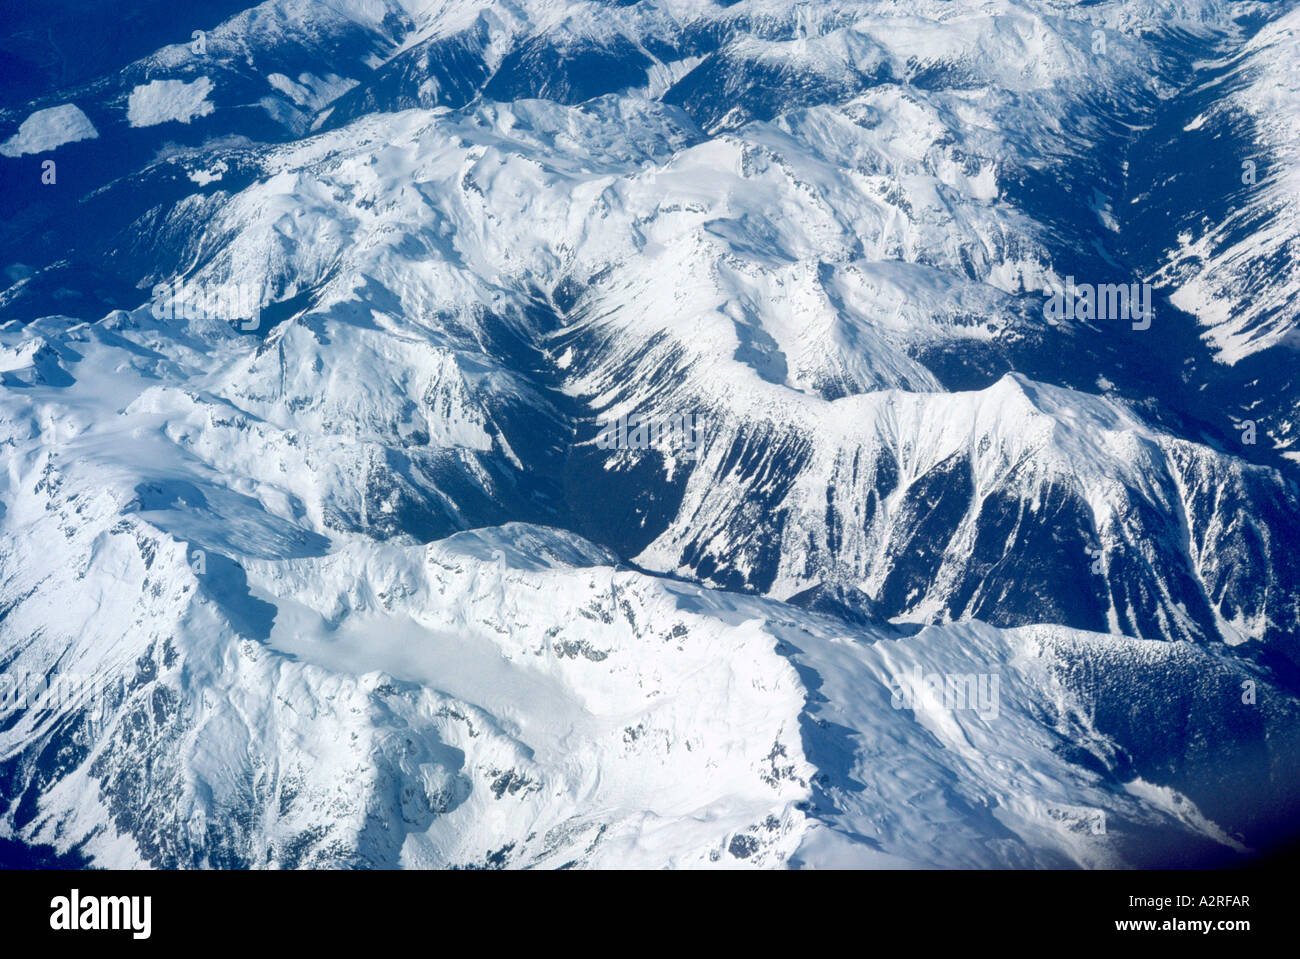 Snow-capped Mountain Peaks in the Canadian Rockies British Columbia Canada Stock Photo